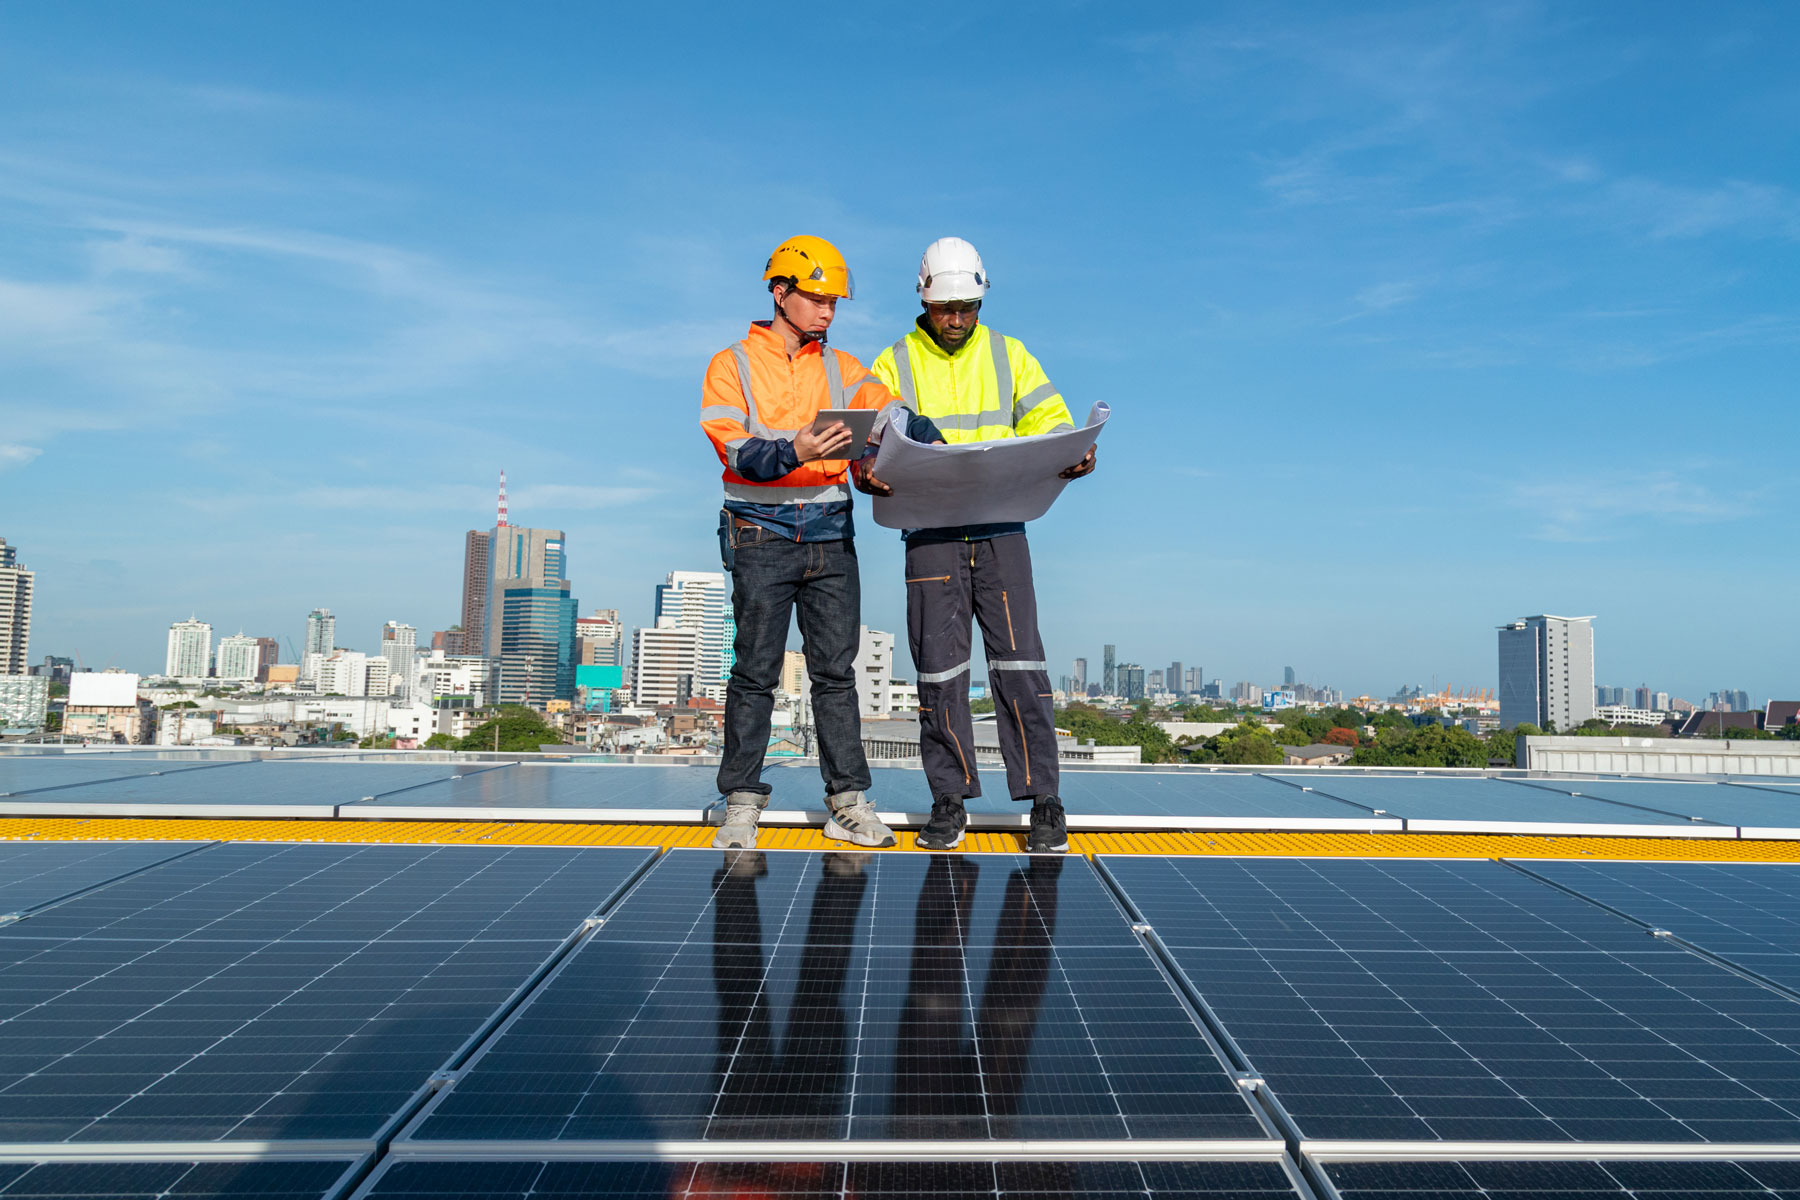 Two people in high vis clothing standing on solar panels